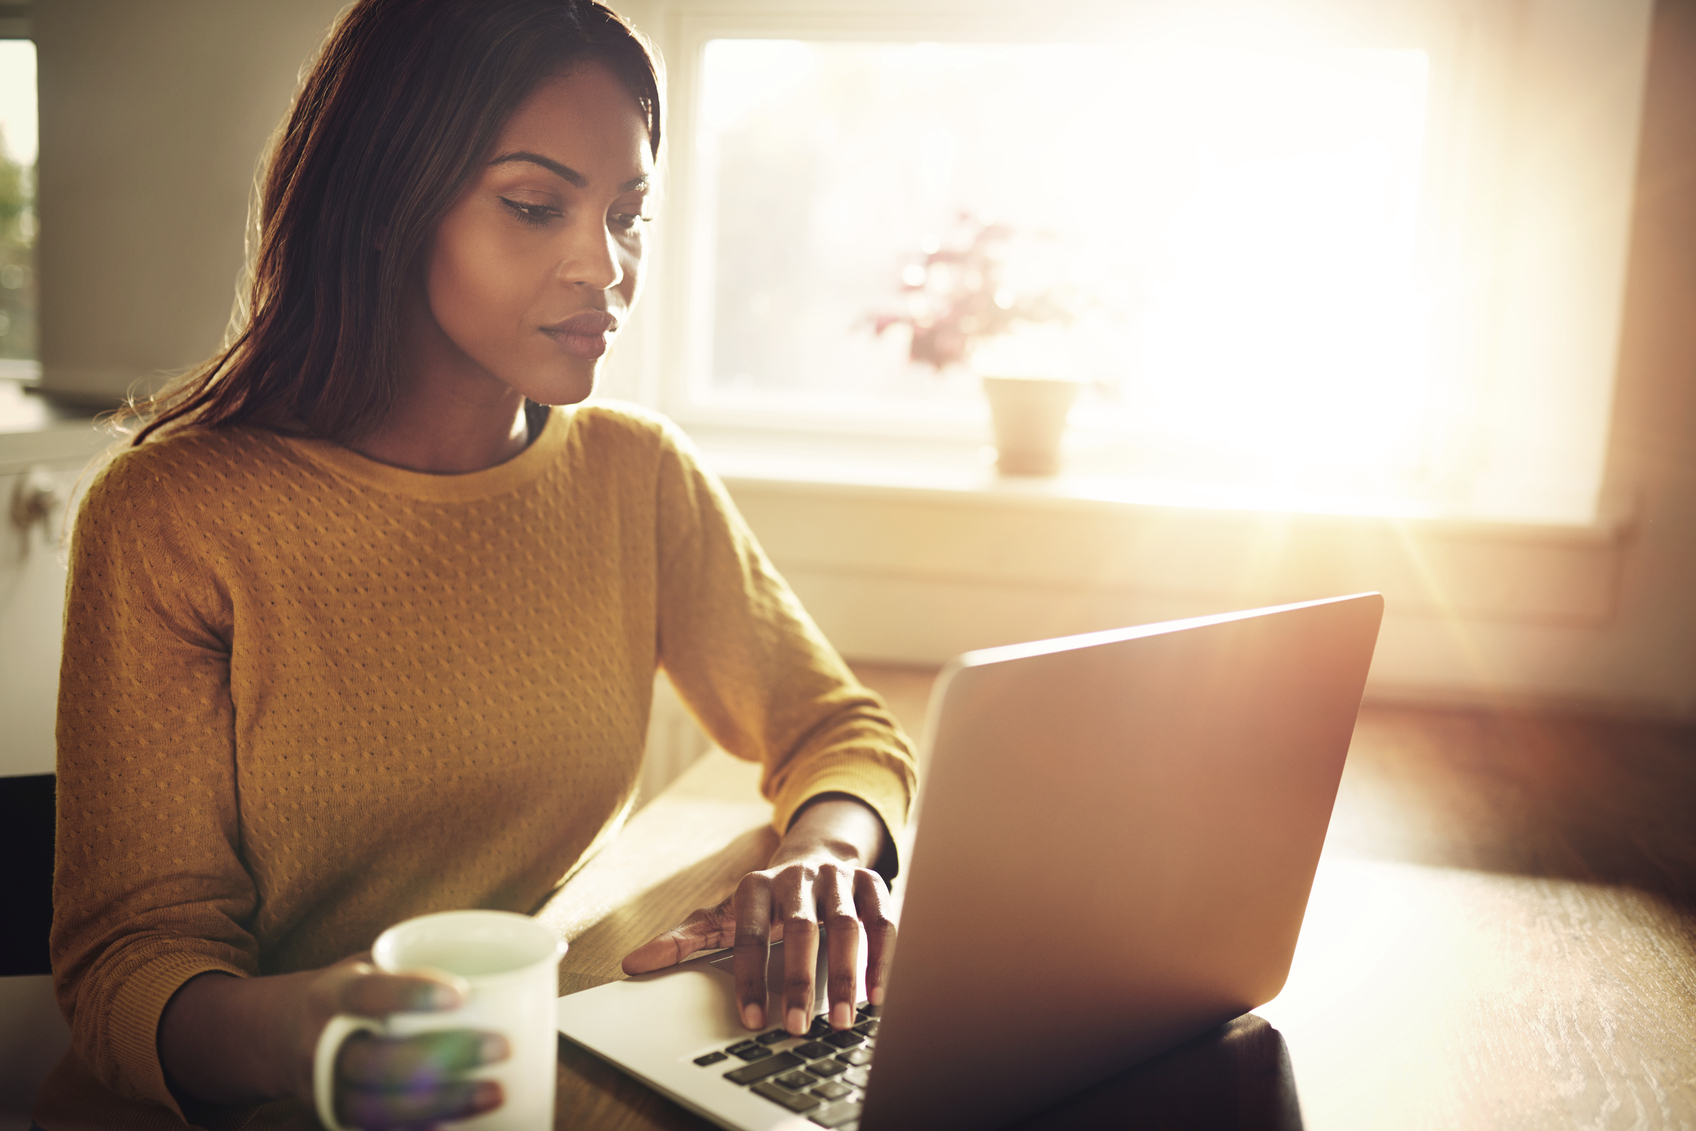 Serious Black adult single female sitting at table holding coffee cup and typing on laptop with light flare coming through window